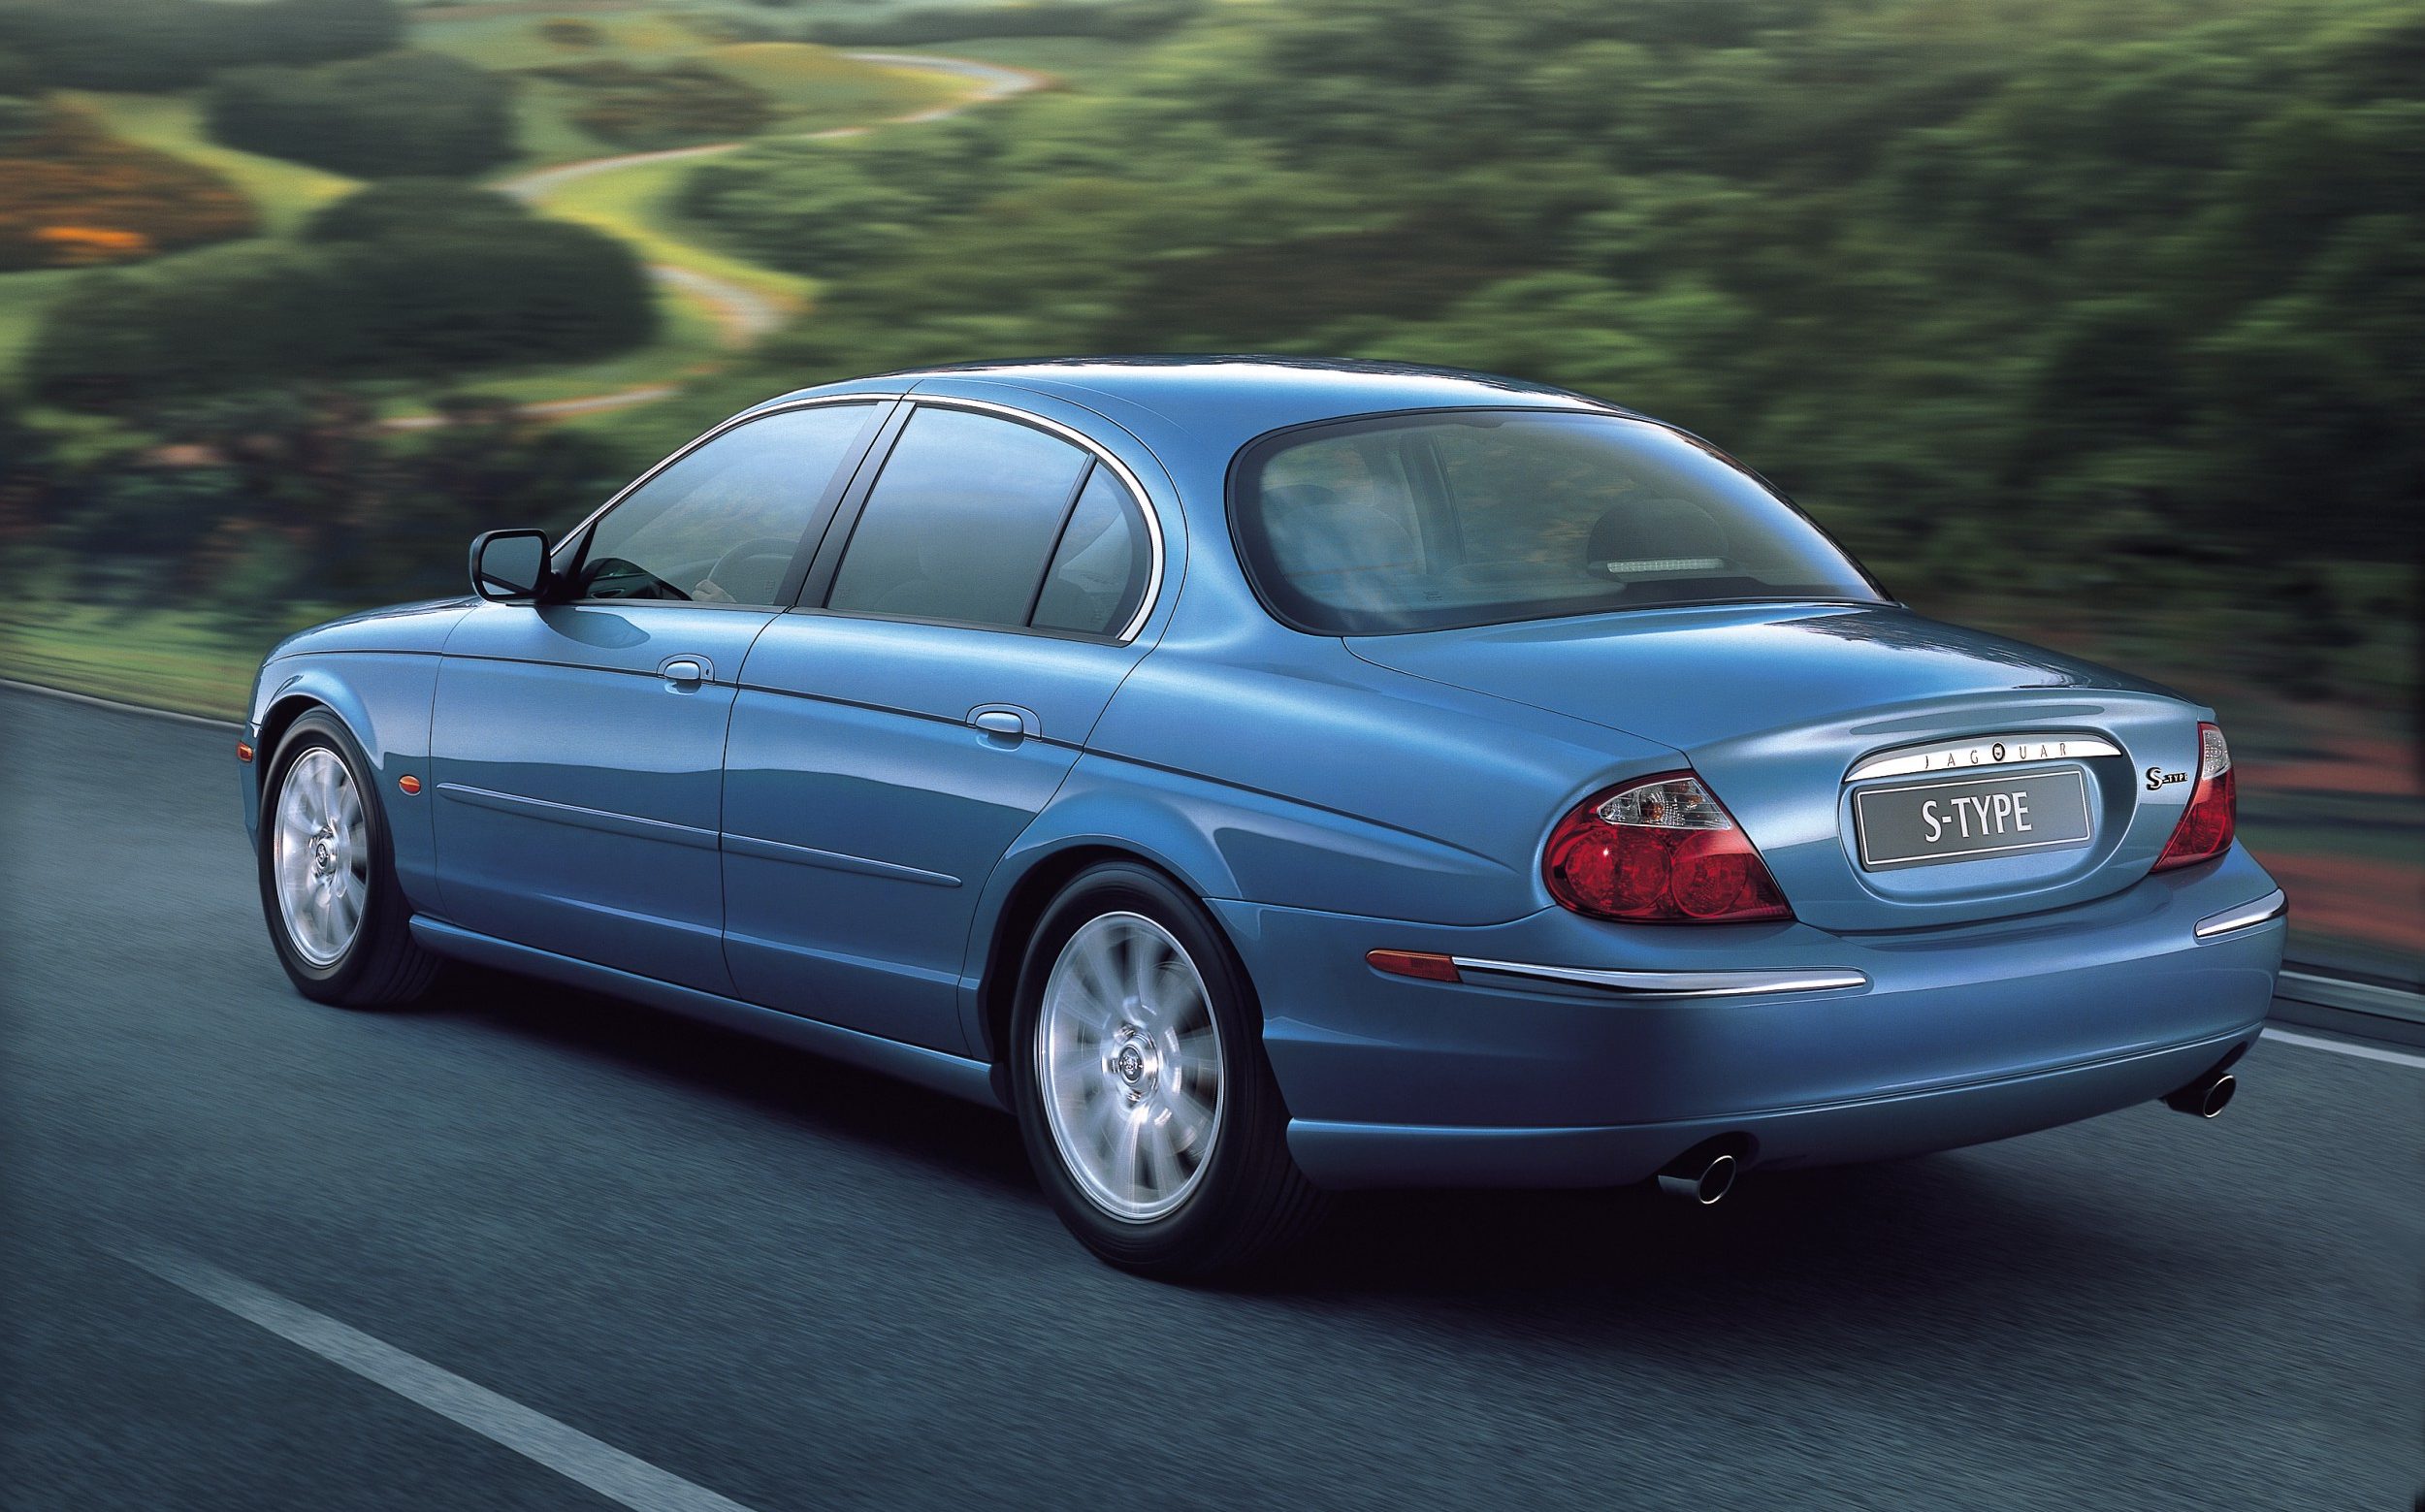 Why the Jaguar S-Type is a guaranteed future classic